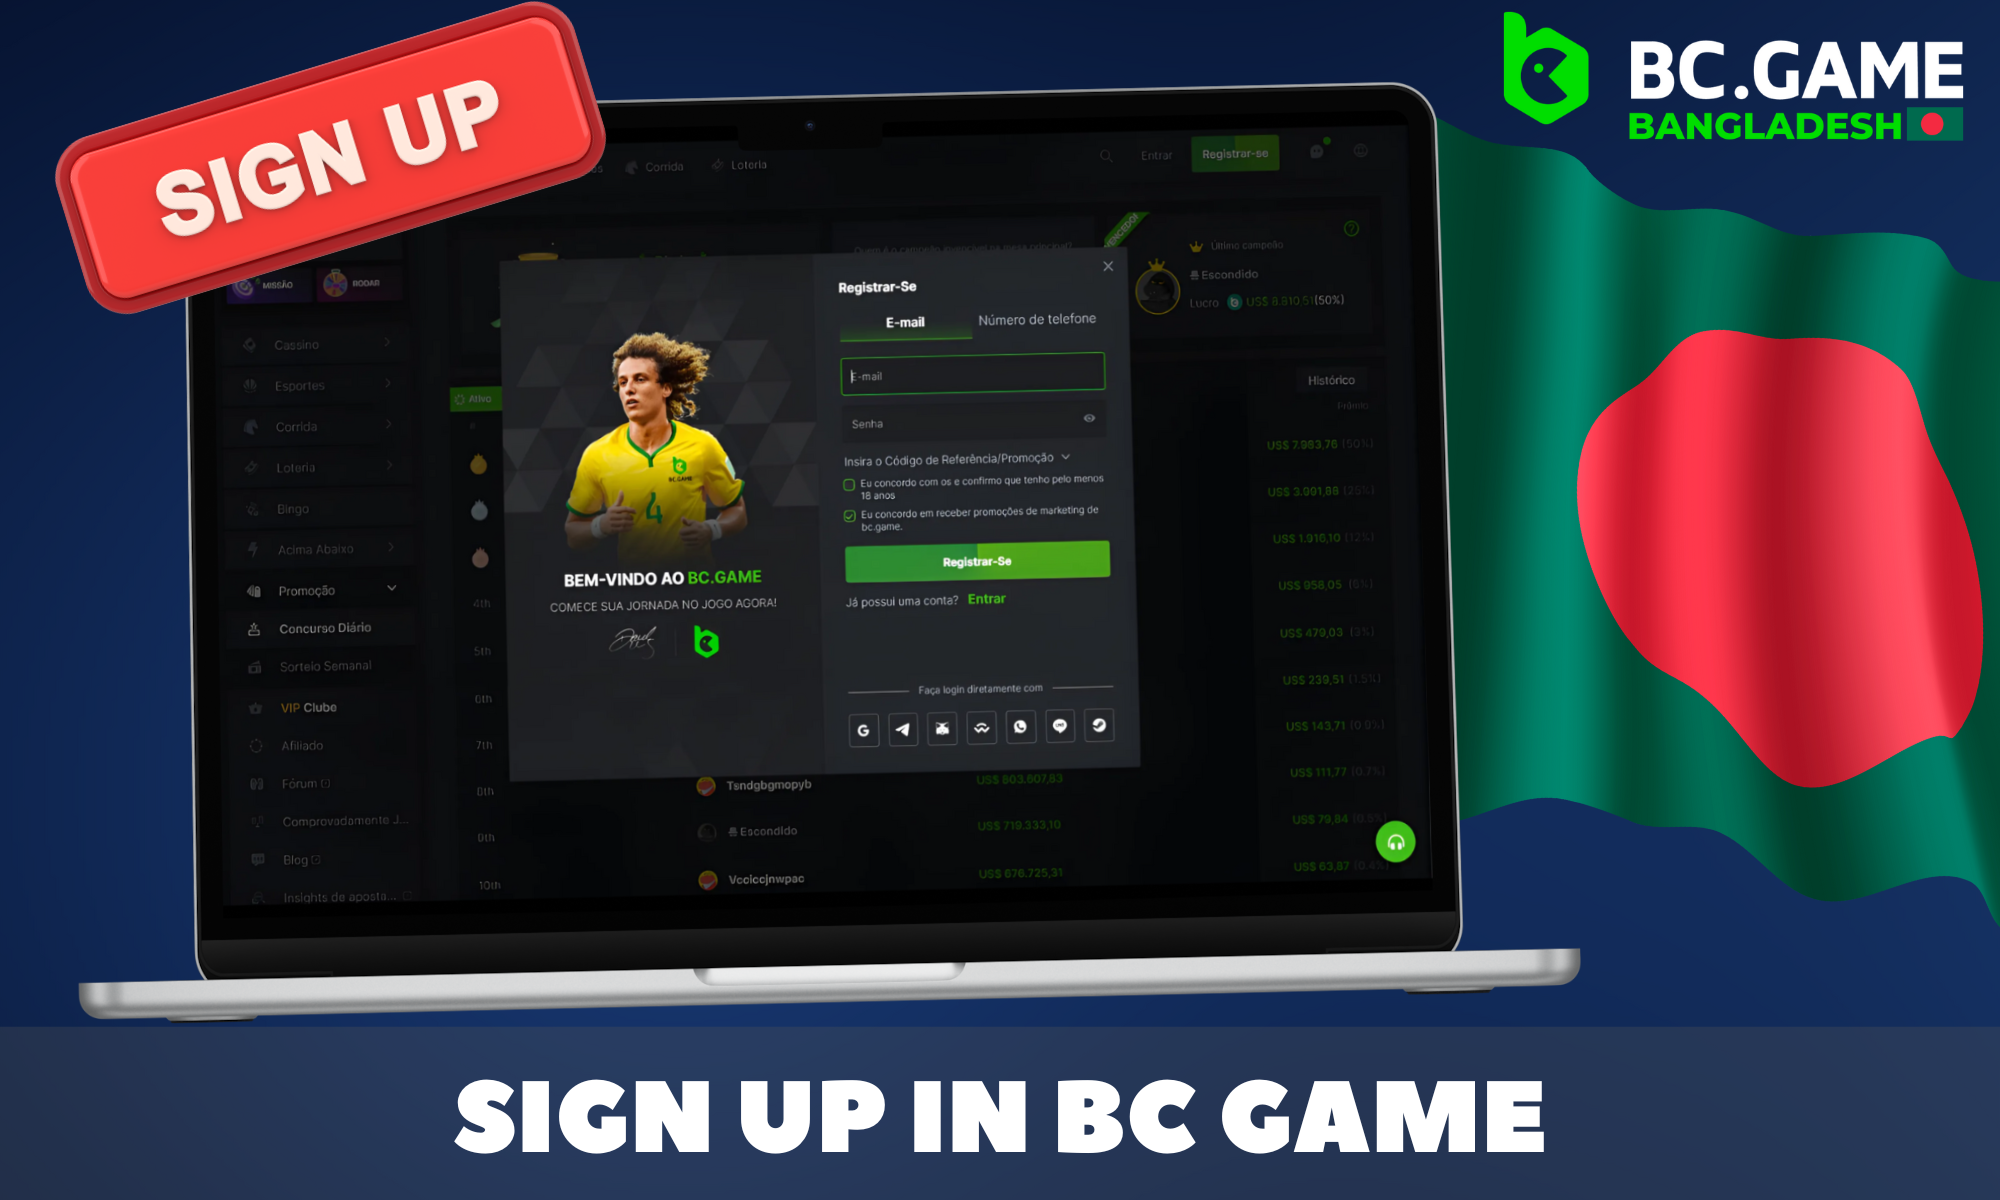 To get access to all the benefits of the casino, including the ability to play and bet on sports for real money, you need to register on the BC Game website